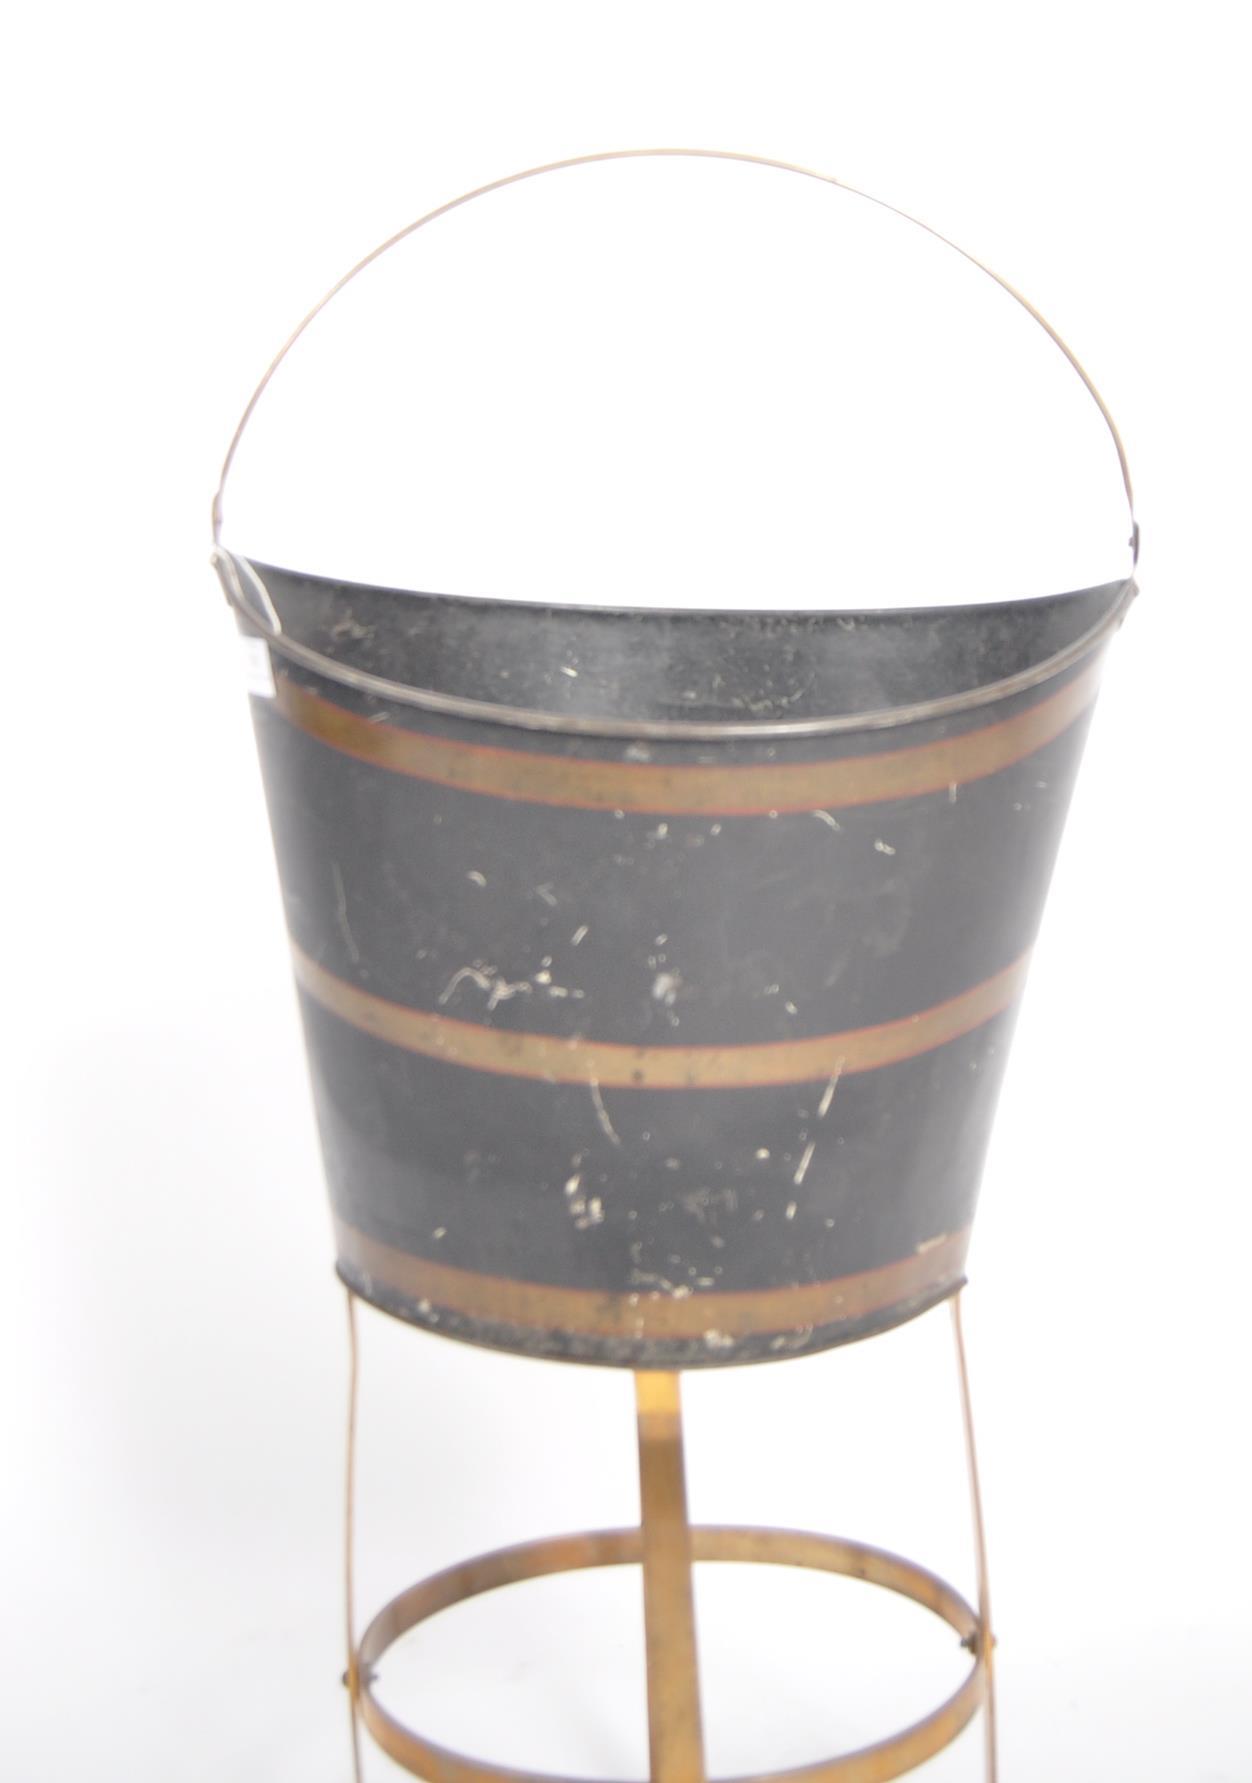 19TH CENTURY METAL PEAT BUCKET ON STAND - Image 4 of 7